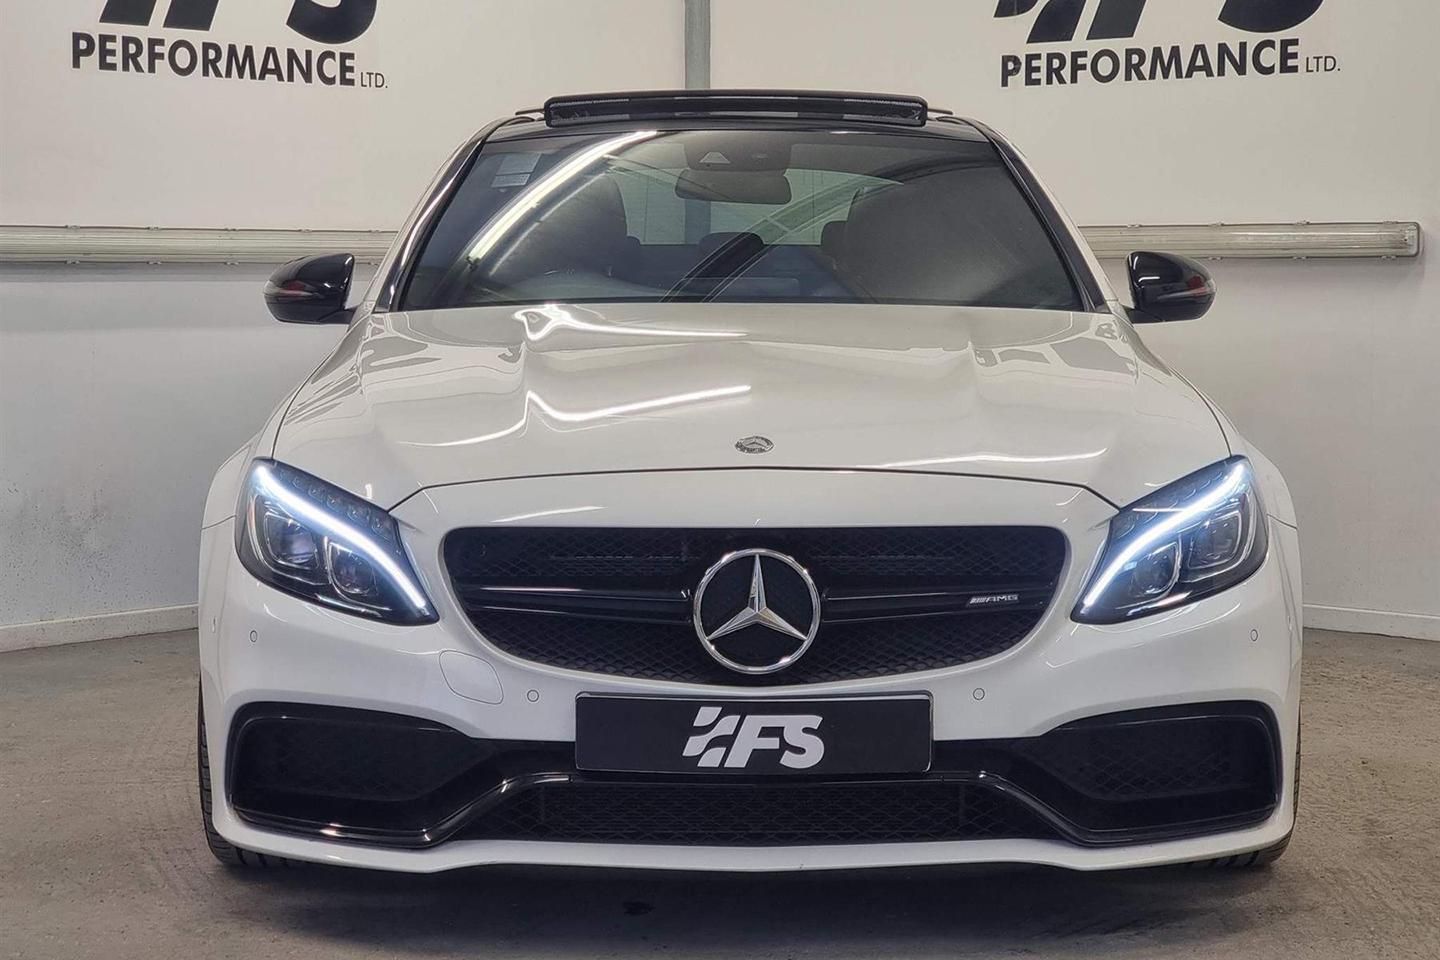 Mercedes Amg C63 Spotted Pistonheads Uk